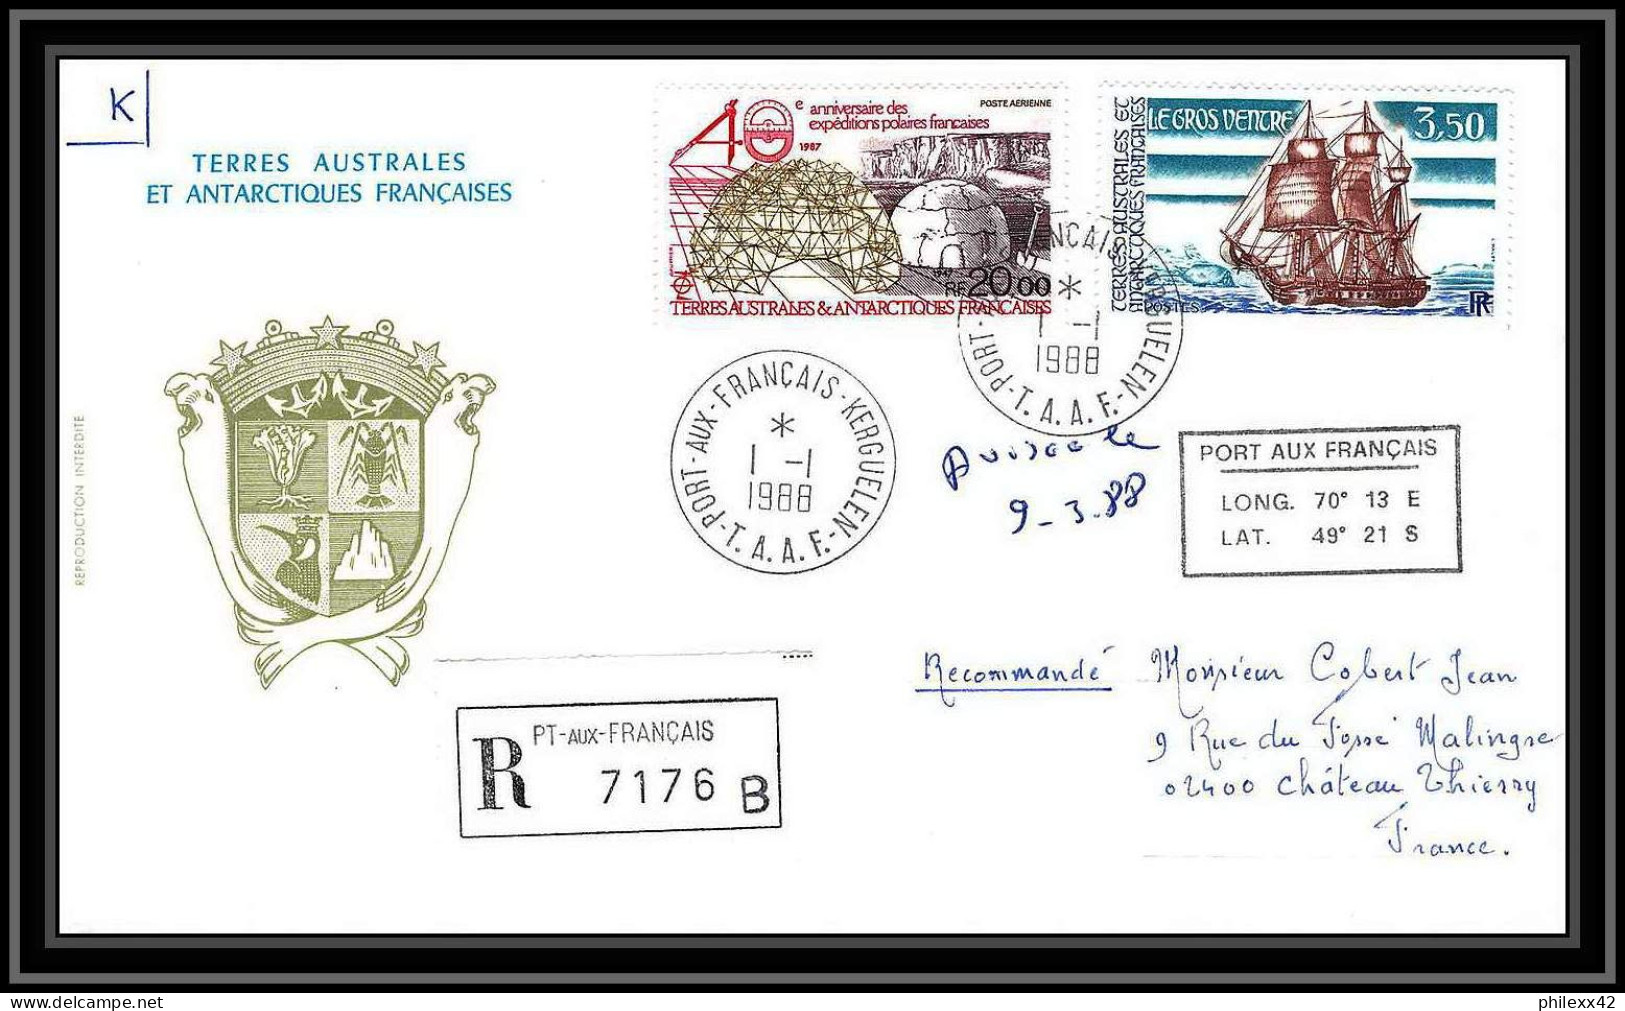 0307 Taaf Terres Australes Antarctic Lettre (cover) 01/01/1988 N° 135 + PA102 Navires Le Gros Ventre Recommandé - Covers & Documents